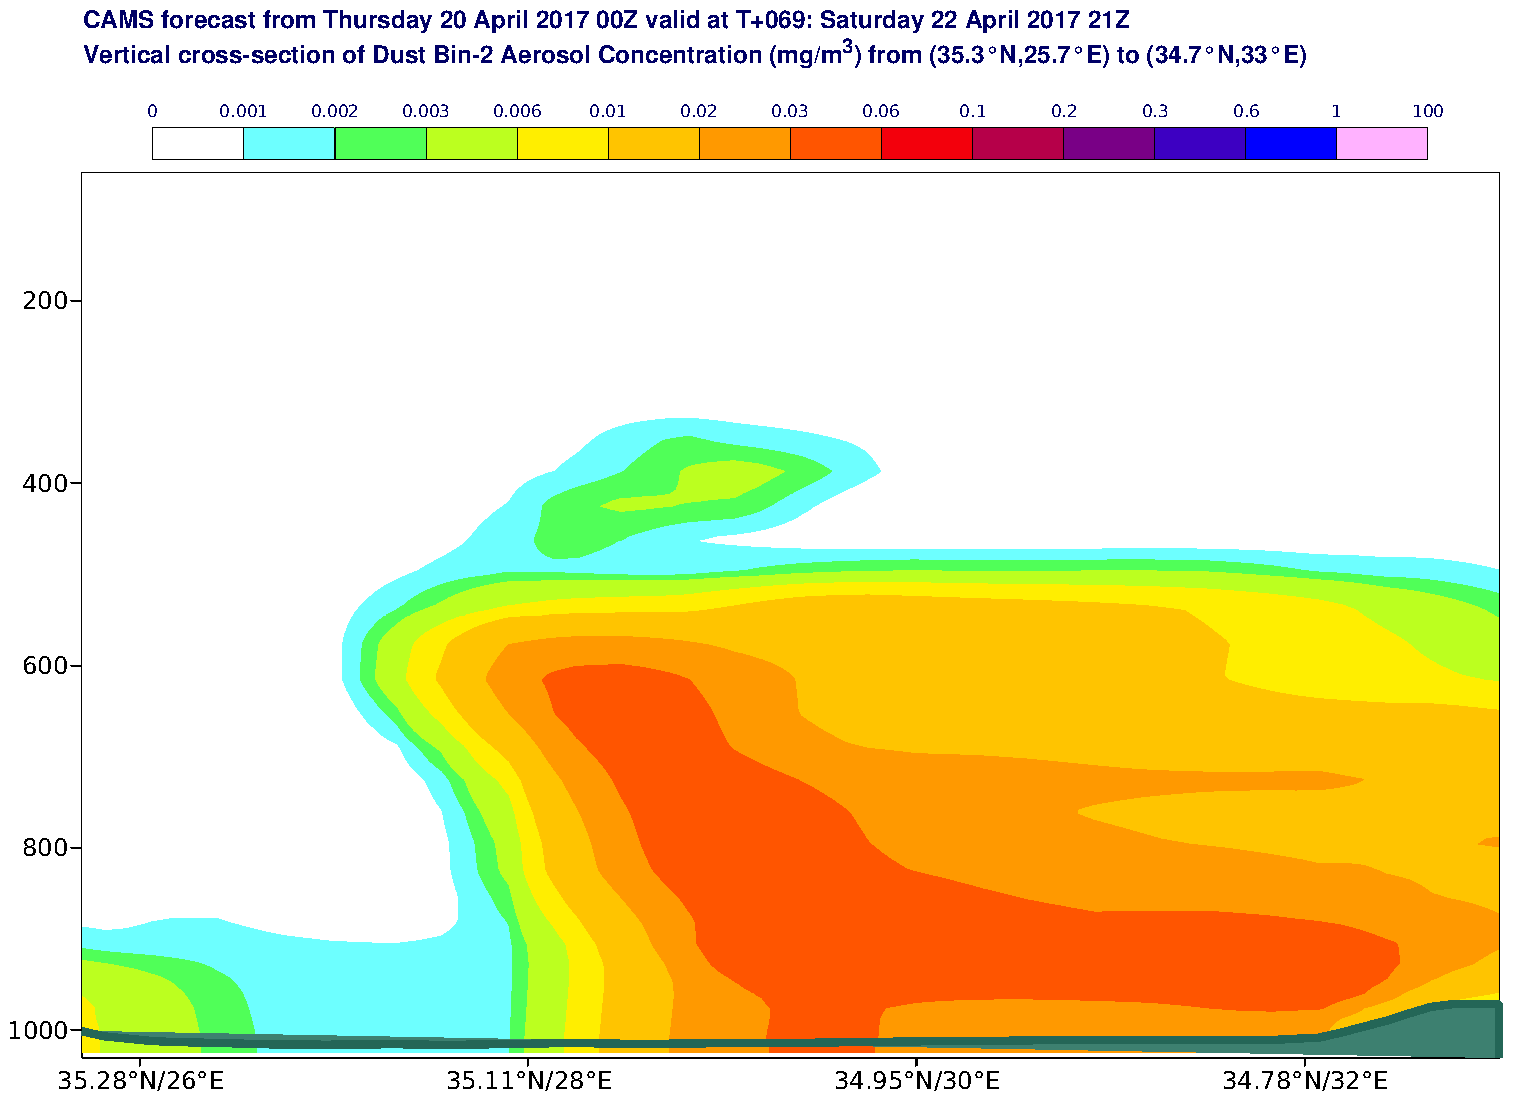 Vertical cross-section of Dust Bin-2 Aerosol Concentration (mg/m3) valid at T69 - 2017-04-22 21:00